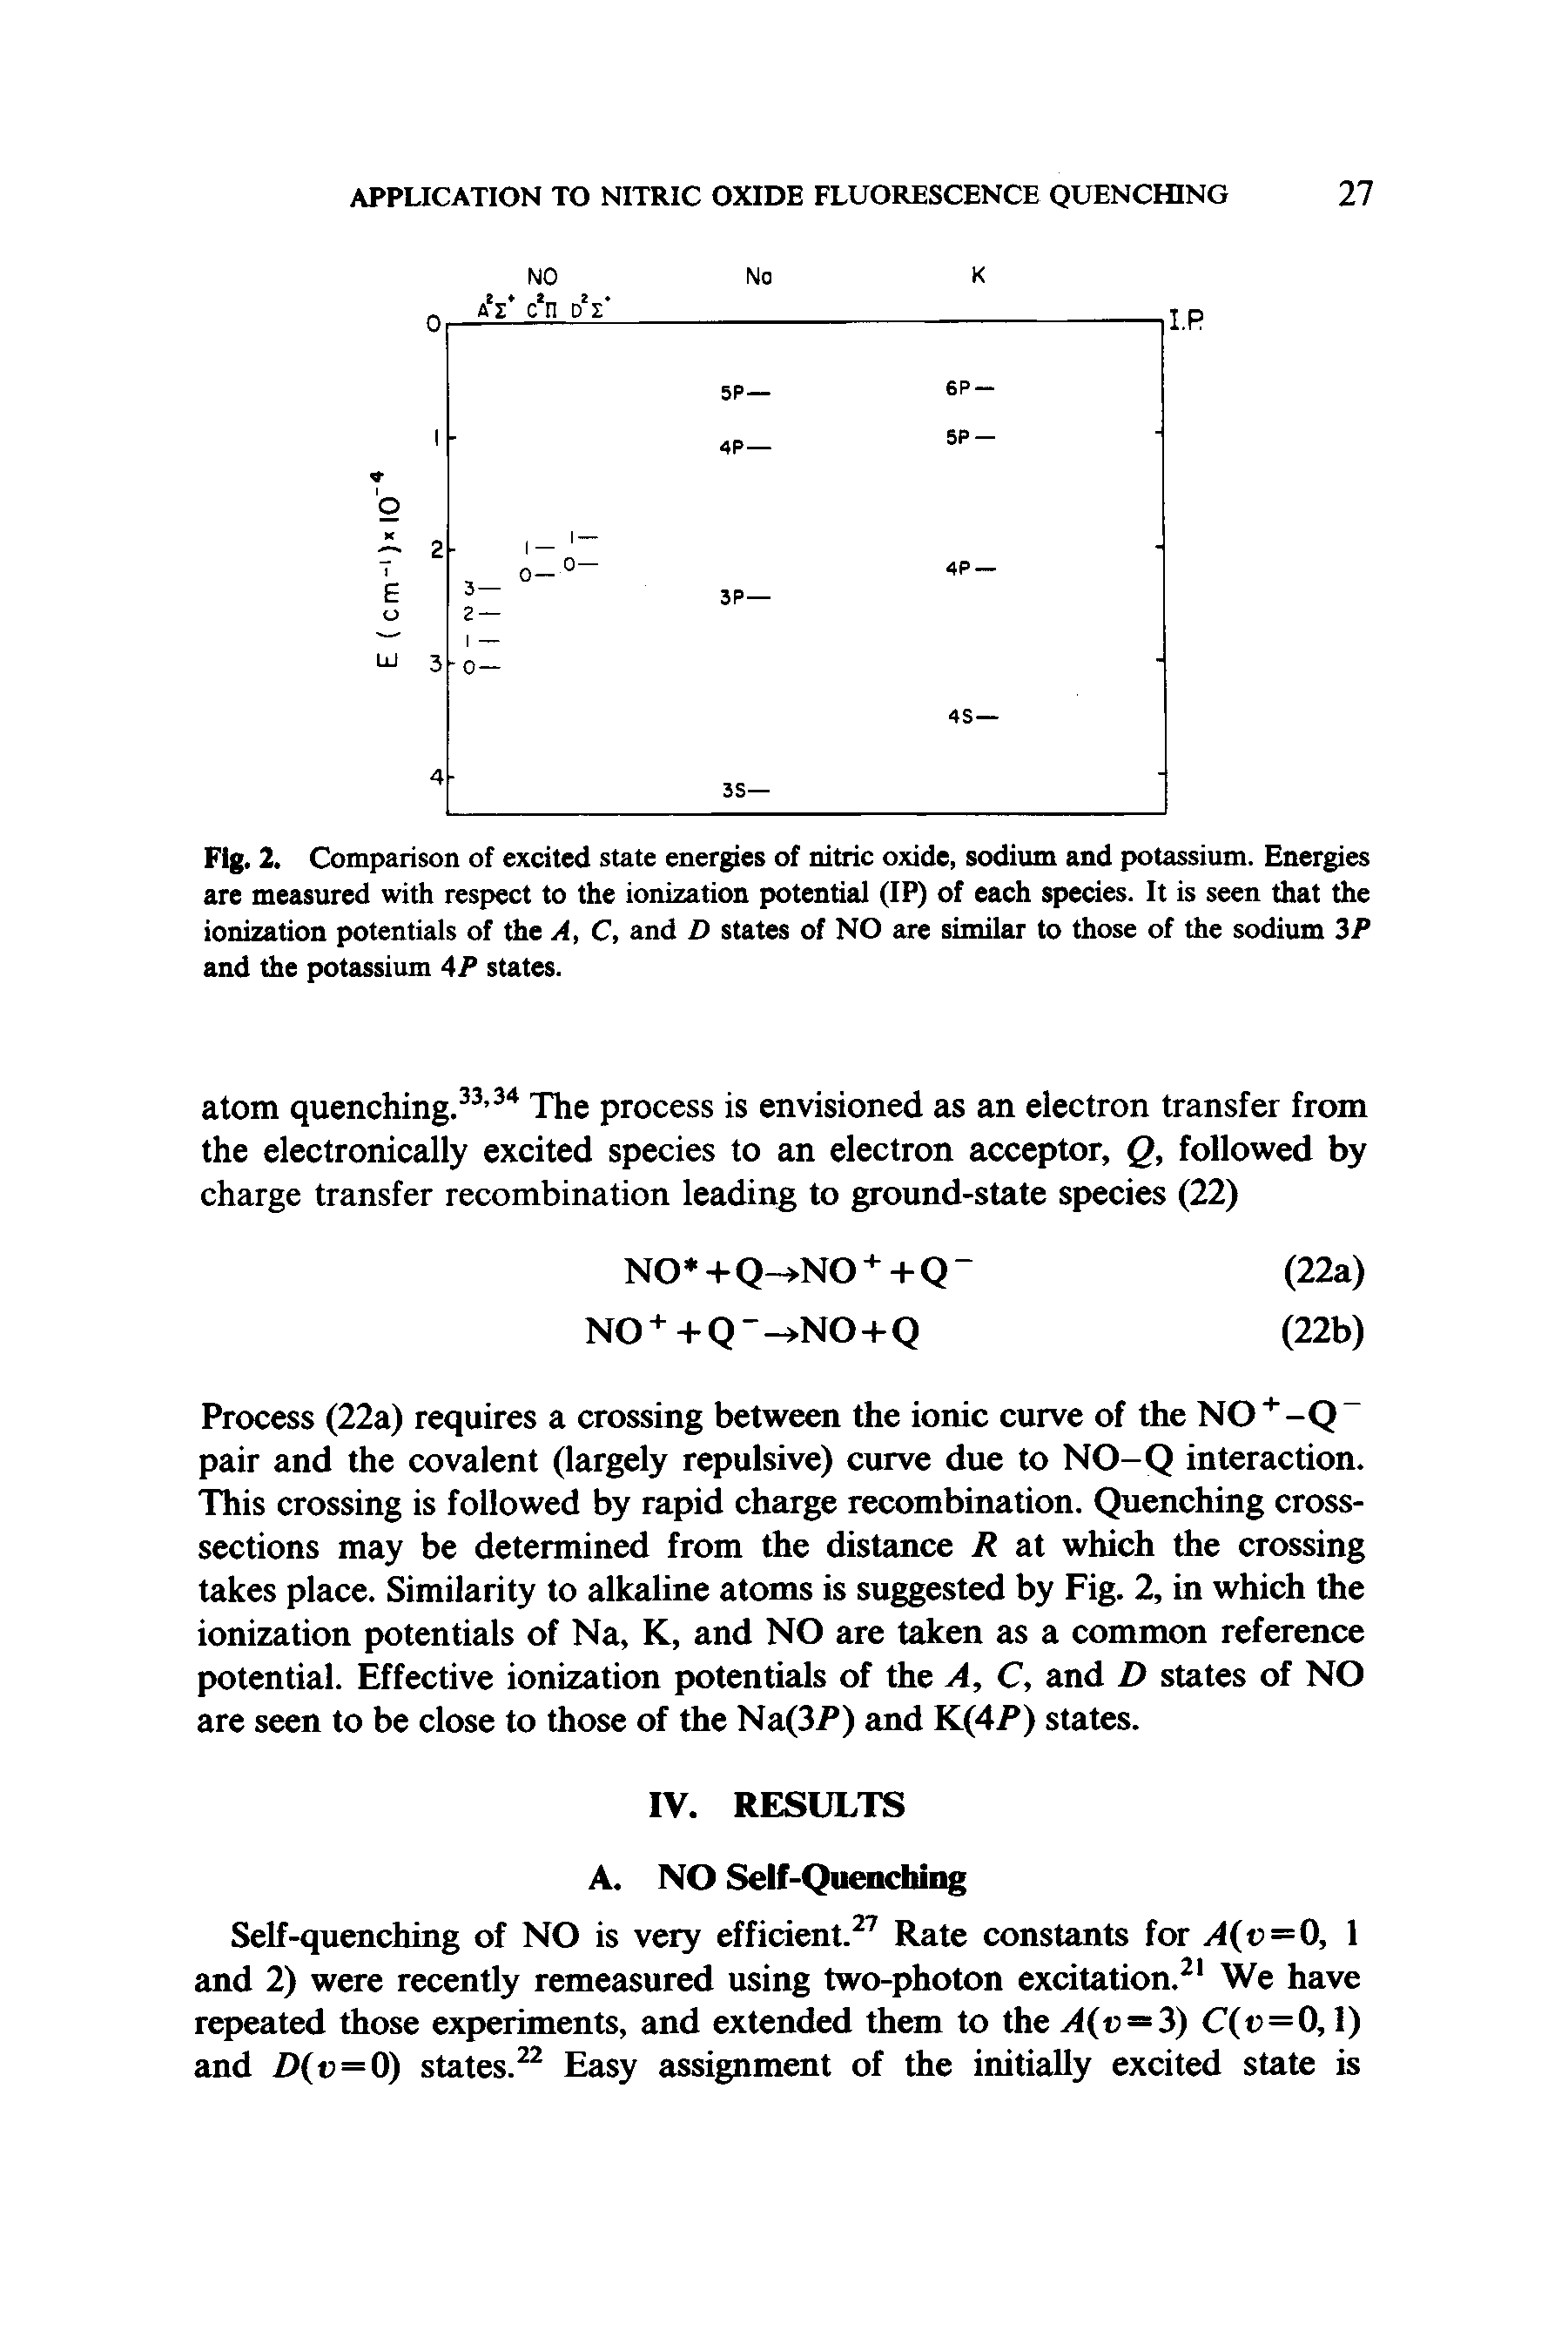 Fig. 2. Comparison of excited state energies of nitric oxide, sodium and potassium. Energies are measured with respect to the ionization potential (IP) of each species. It is seen that the ionization potentials of the A, C, and D states of NO are similar to those of the sodium 3P and the potassium 4P states.